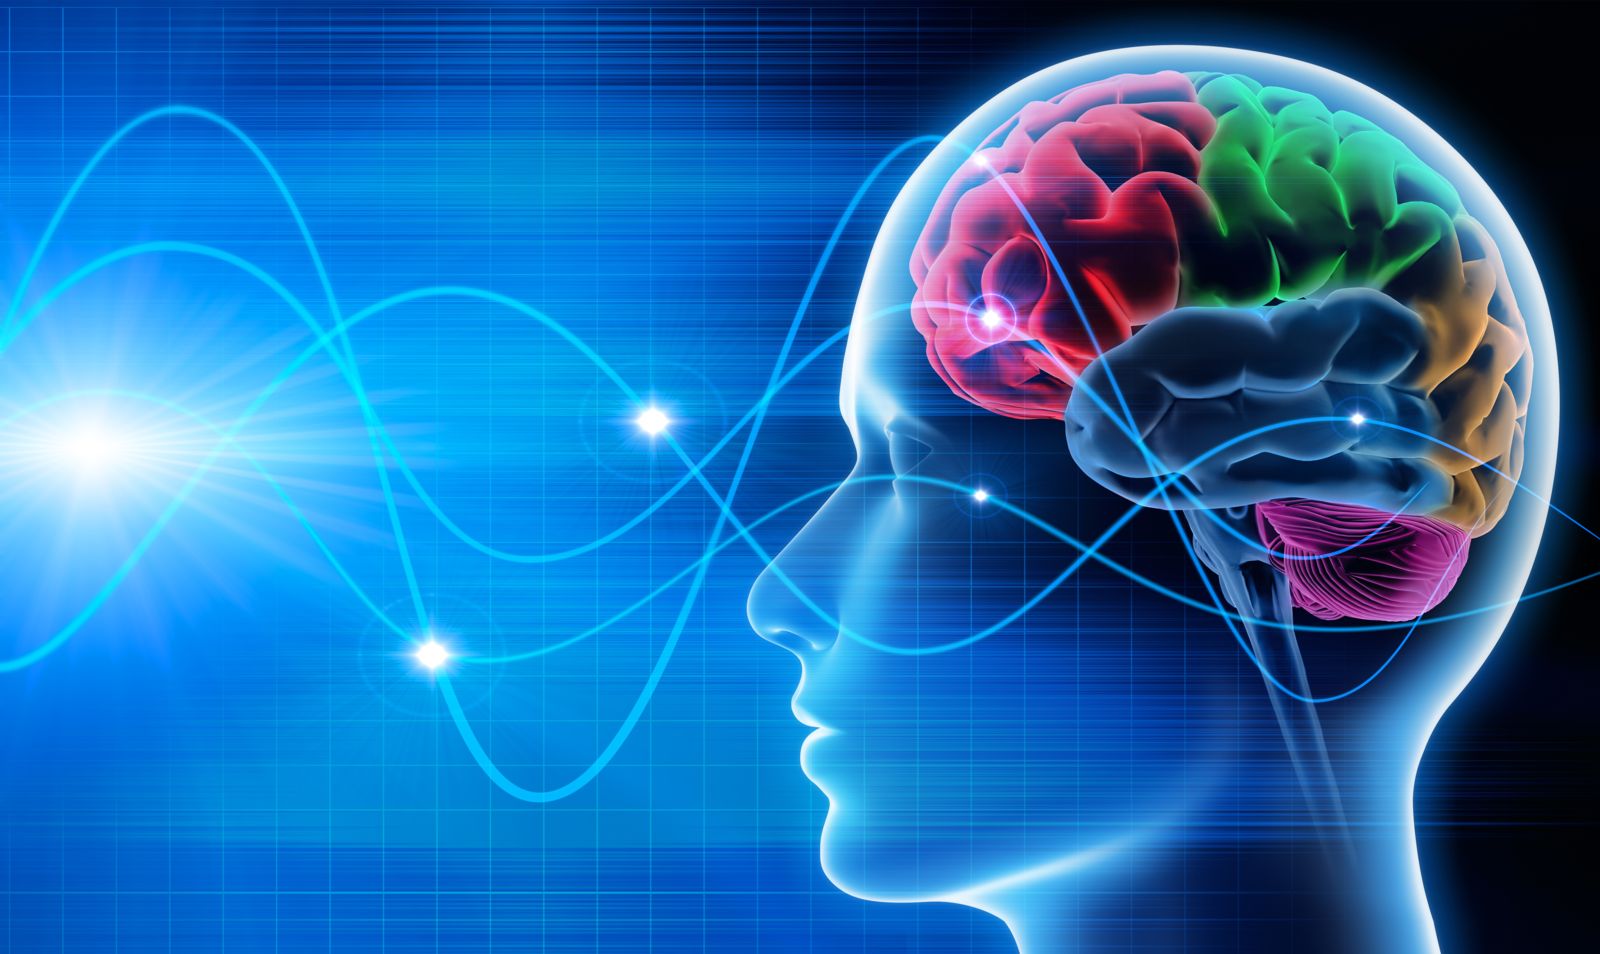 What Are The Brain Waves?